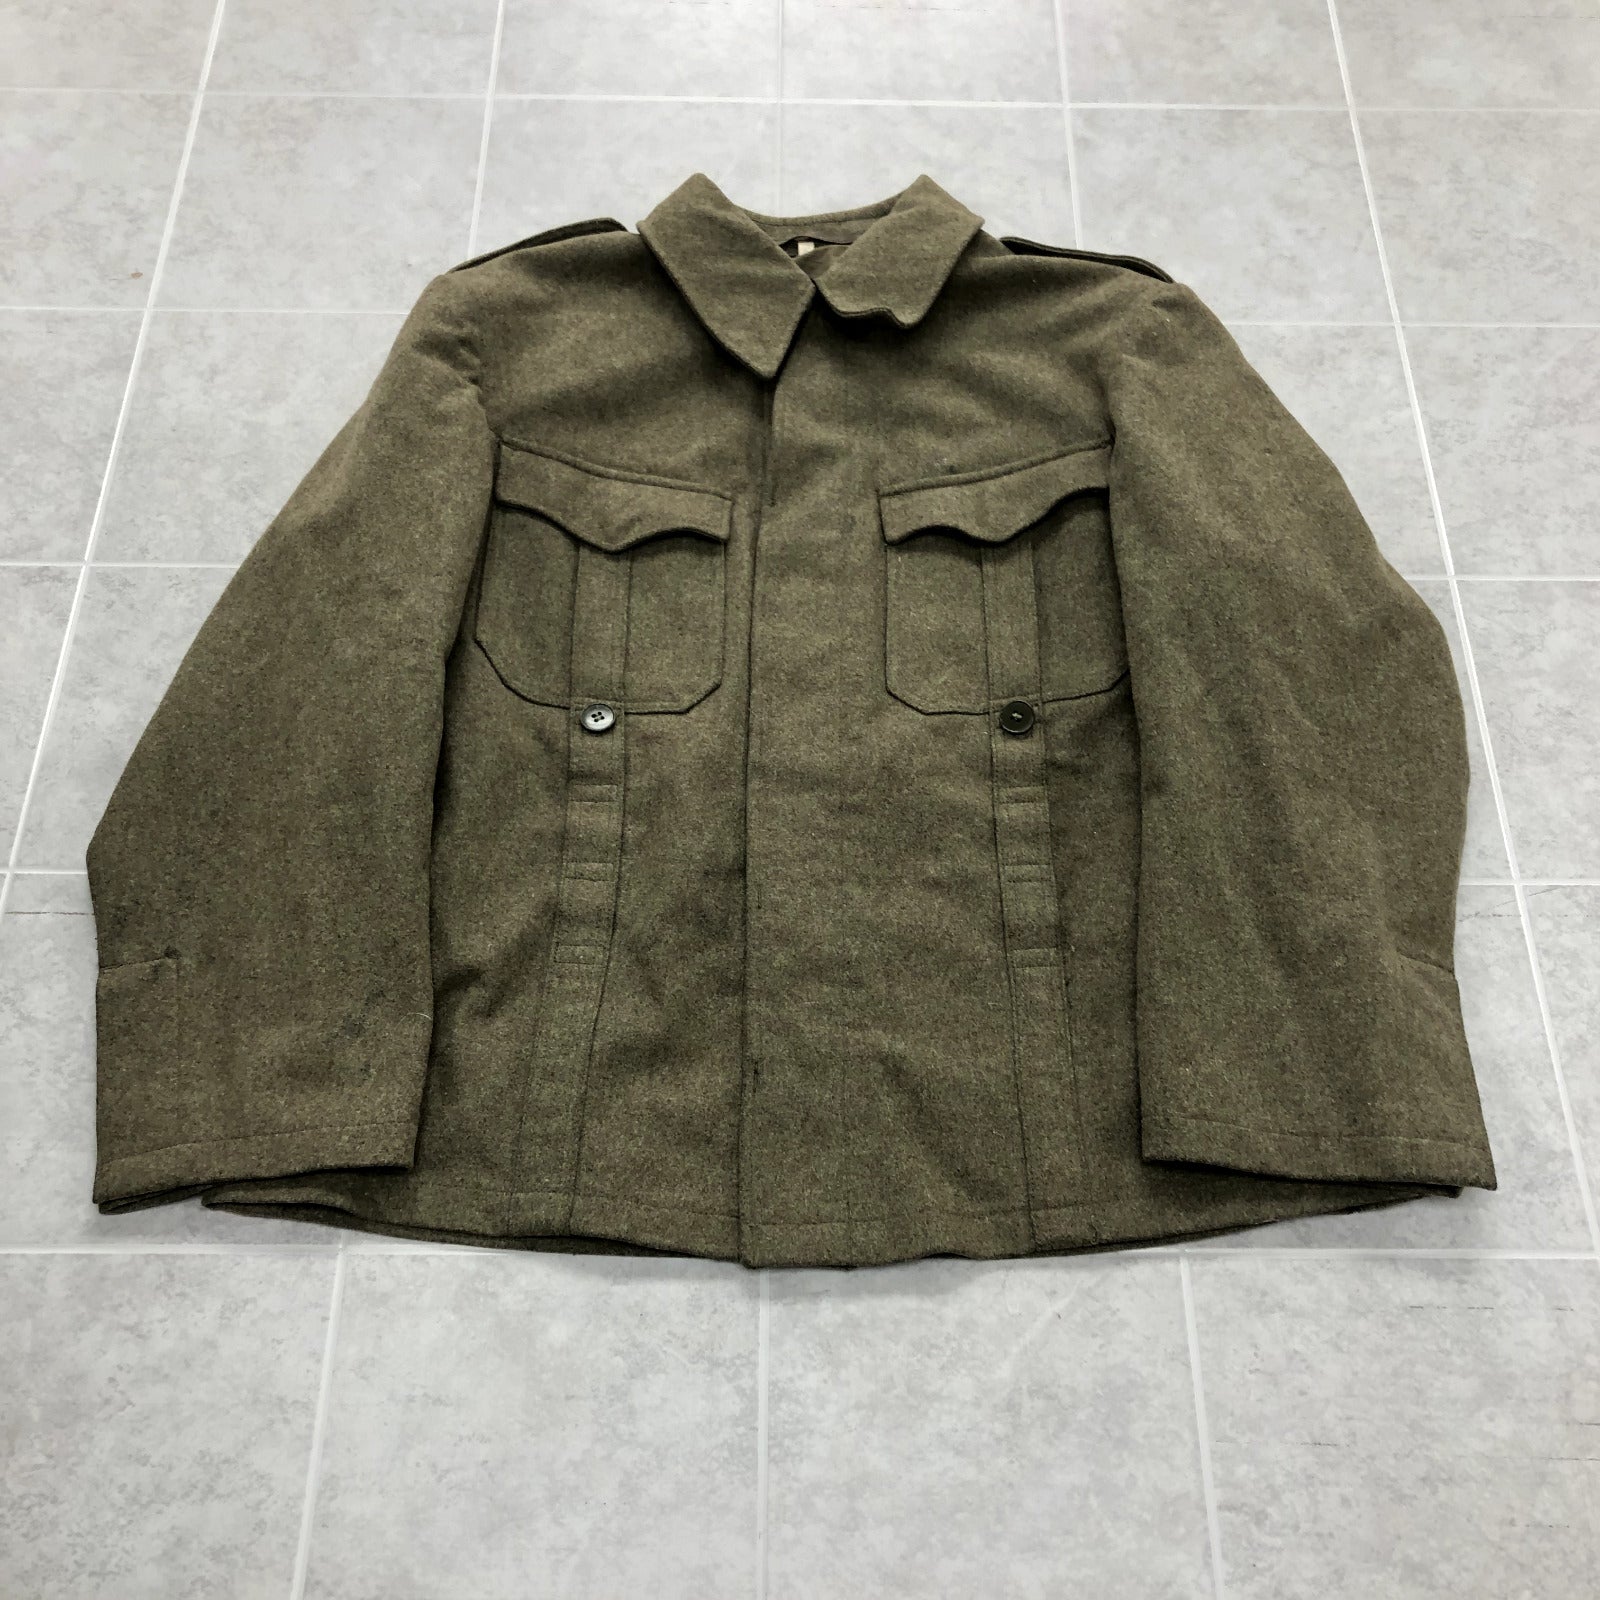 Vintage Green Long Sleeve Button Up Collared Wool Military Coat Adult Size 44